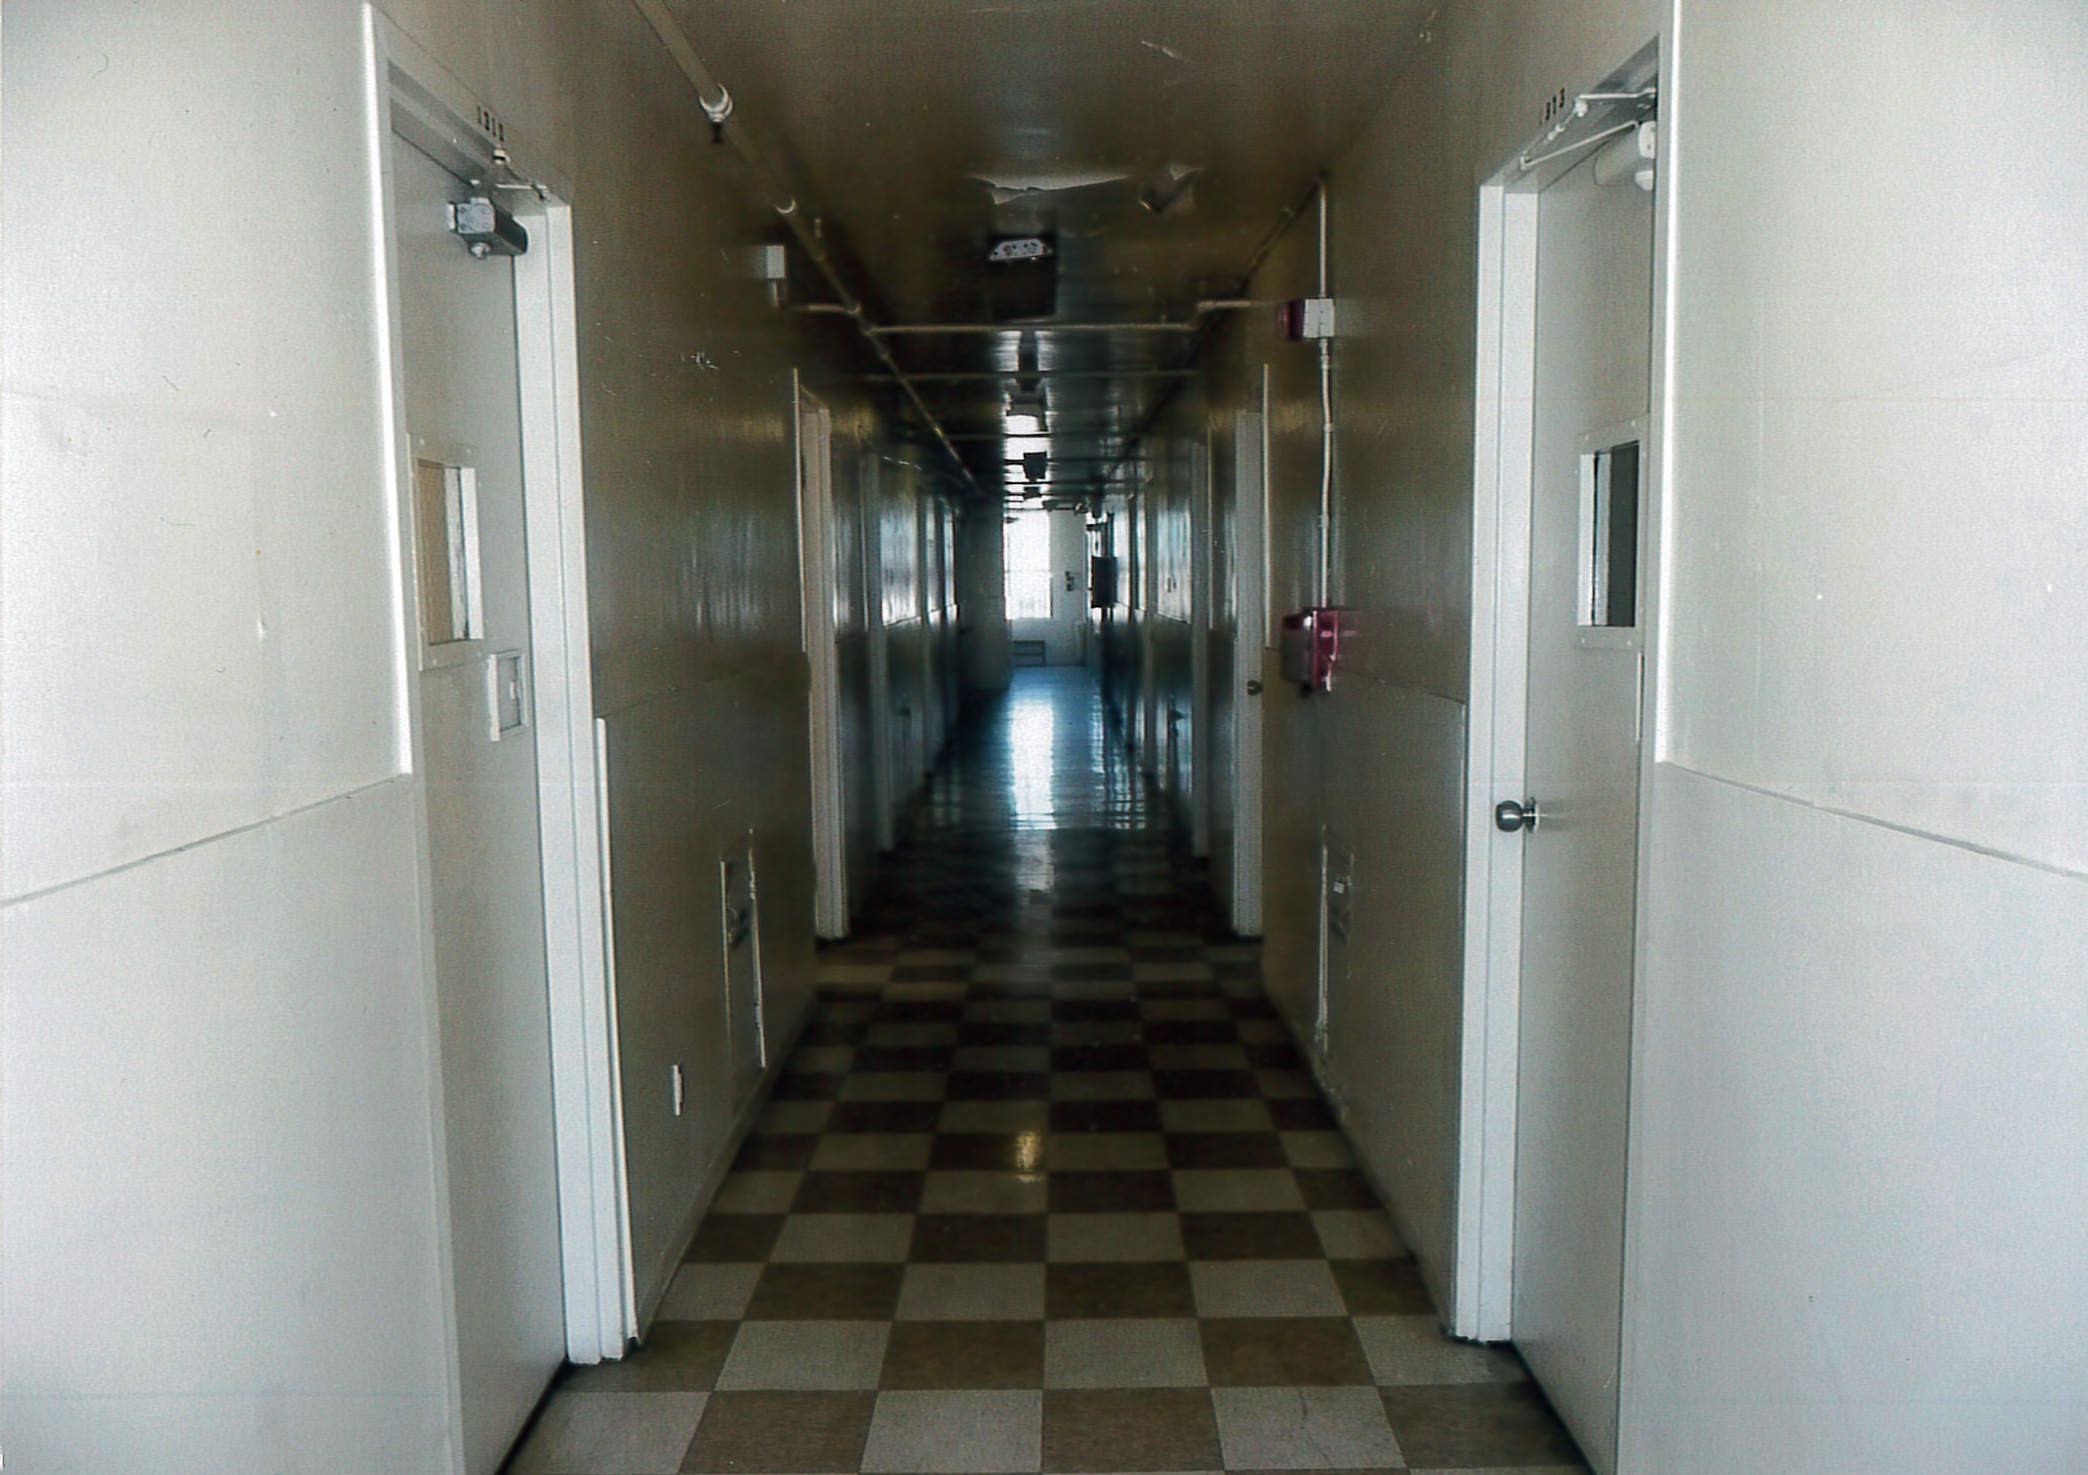 Modified hallway, typical of upper floors